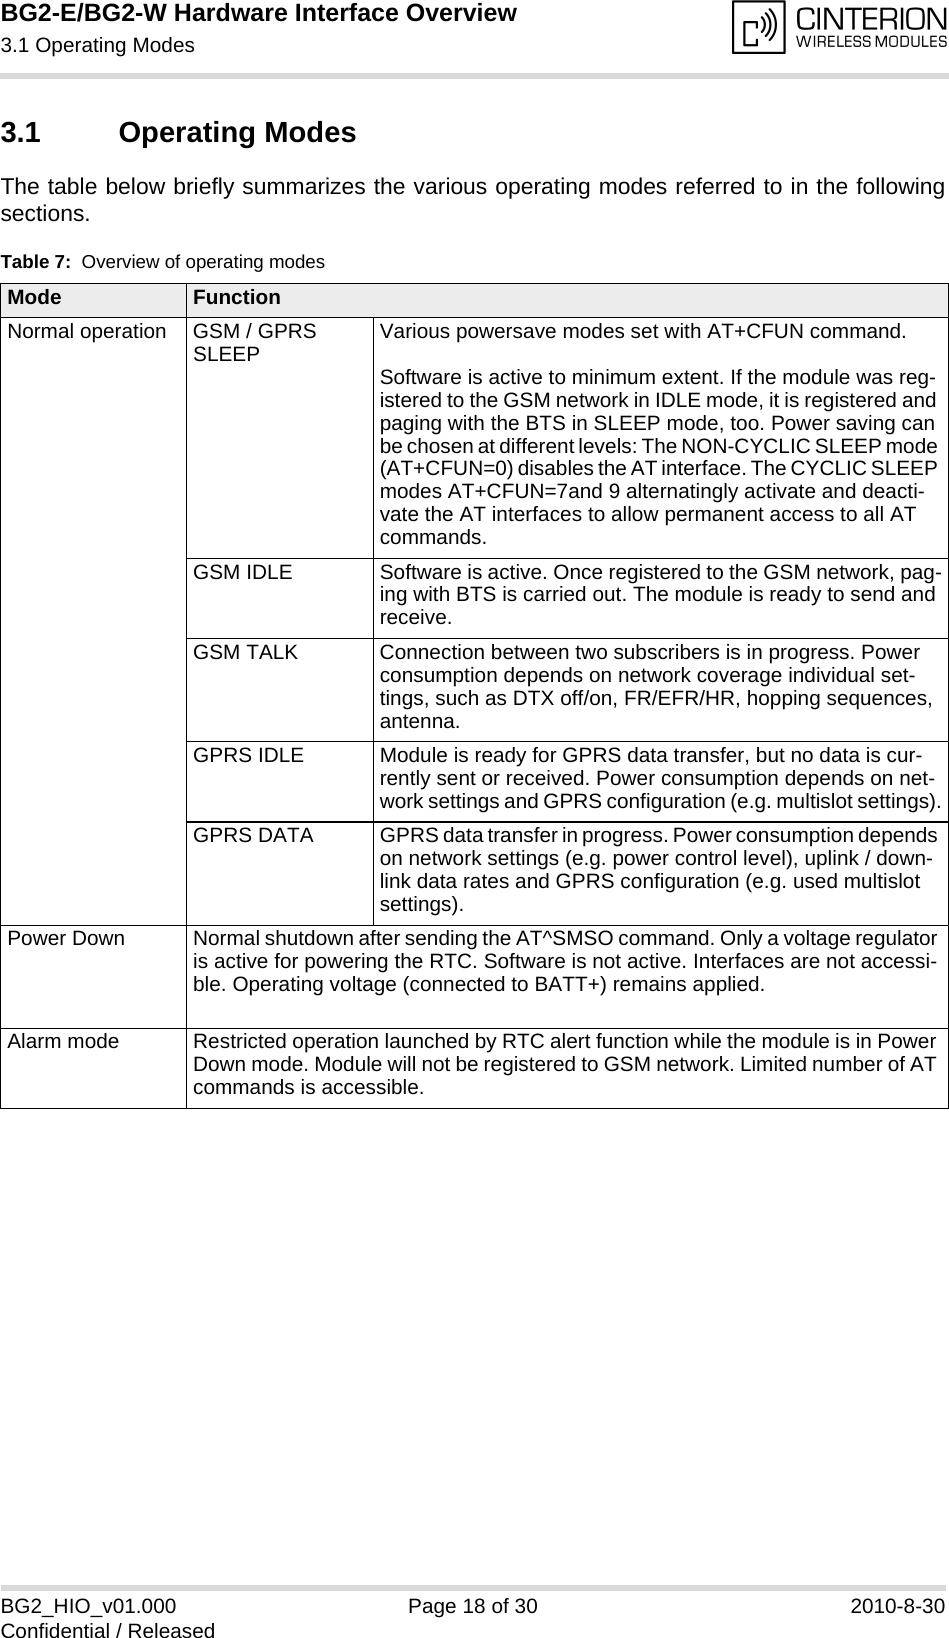 BG2-E/BG2-W Hardware Interface Overview3.1 Operating Modes18BG2_HIO_v01.000 Page 18 of 30 2010-8-30Confidential / Released3.1 Operating ModesThe table below briefly summarizes the various operating modes referred to in the followingsections. Table 7:  Overview of operating modesMode FunctionNormal operation GSM / GPRS SLEEP Various powersave modes set with AT+CFUN command. Software is active to minimum extent. If the module was reg-istered to the GSM network in IDLE mode, it is registered and paging with the BTS in SLEEP mode, too. Power saving can be chosen at different levels: The NON-CYCLIC SLEEP mode (AT+CFUN=0) disables the AT interface. The CYCLIC SLEEP modes AT+CFUN=7and 9 alternatingly activate and deacti-vate the AT interfaces to allow permanent access to all AT commands.GSM IDLE Software is active. Once registered to the GSM network, pag-ing with BTS is carried out. The module is ready to send and receive.GSM TALK Connection between two subscribers is in progress. Power consumption depends on network coverage individual set-tings, such as DTX off/on, FR/EFR/HR, hopping sequences, antenna.GPRS IDLE Module is ready for GPRS data transfer, but no data is cur-rently sent or received. Power consumption depends on net-work settings and GPRS configuration (e.g. multislot settings).GPRS DATA GPRS data transfer in progress. Power consumption depends on network settings (e.g. power control level), uplink / down-link data rates and GPRS configuration (e.g. used multislot settings).Power Down Normal shutdown after sending the AT^SMSO command. Only a voltage regulator is active for powering the RTC. Software is not active. Interfaces are not accessi-ble. Operating voltage (connected to BATT+) remains applied.Alarm mode Restricted operation launched by RTC alert function while the module is in Power Down mode. Module will not be registered to GSM network. Limited number of AT commands is accessible. 